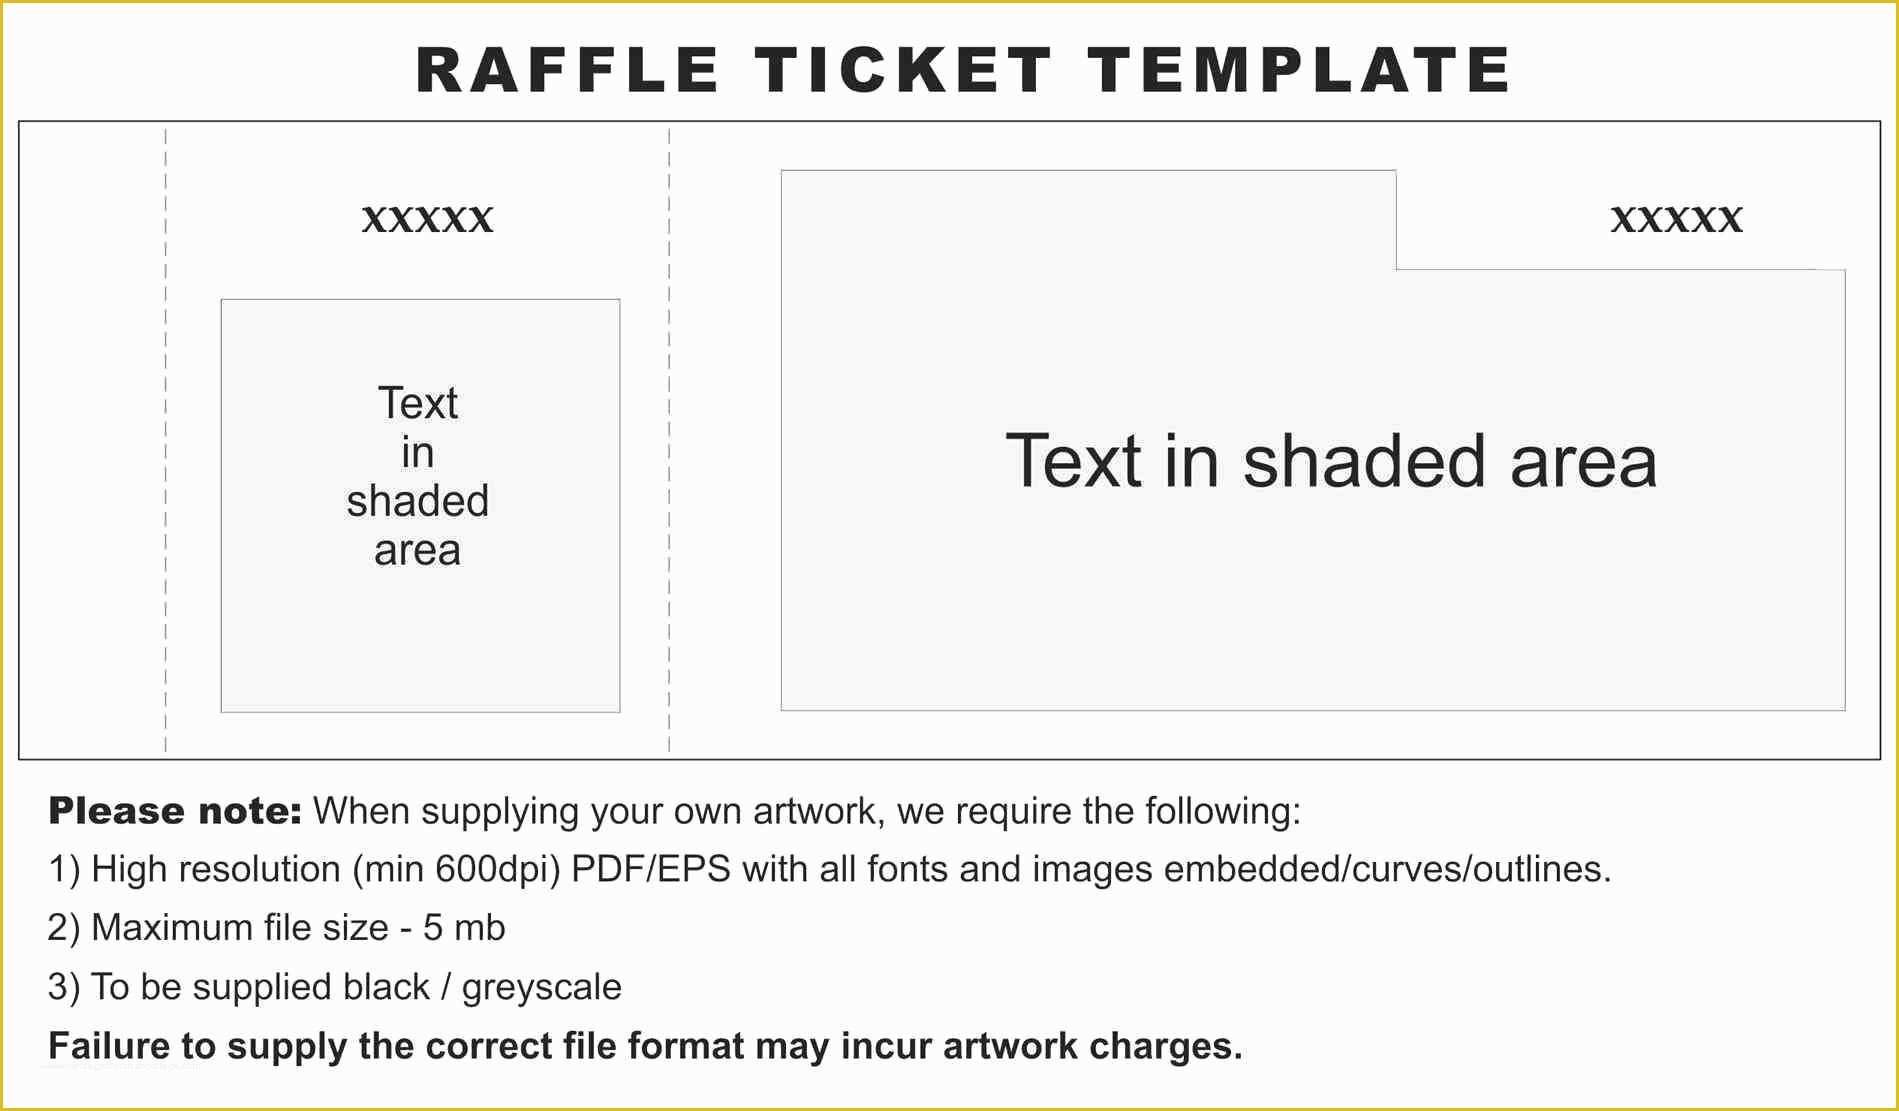 Car Wash Ticket Template Free Download Of Inspirational Excel Raffle Ticket Template Free Download